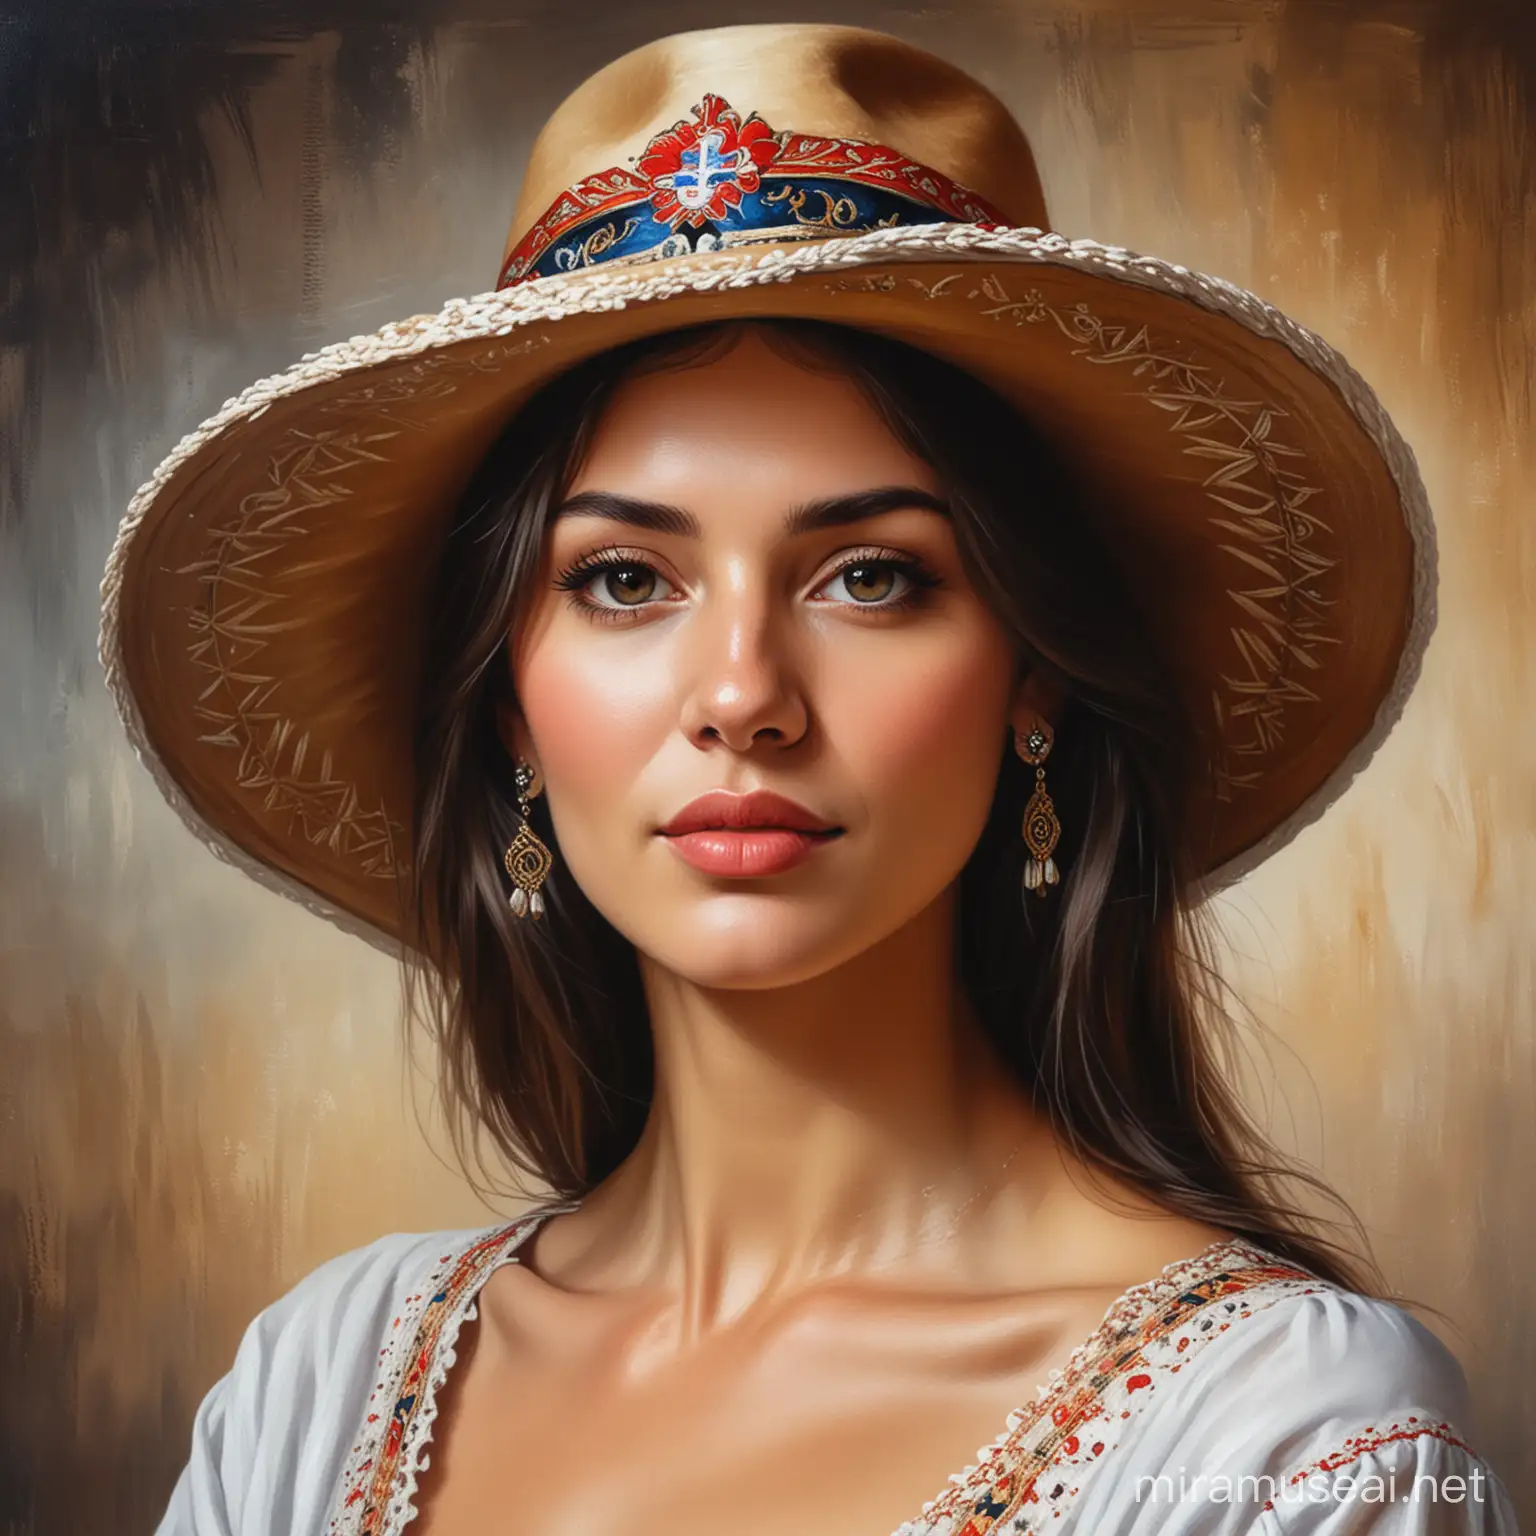 Serbian Woman in Traditional Hat Elegant Cultural Portrait Painting